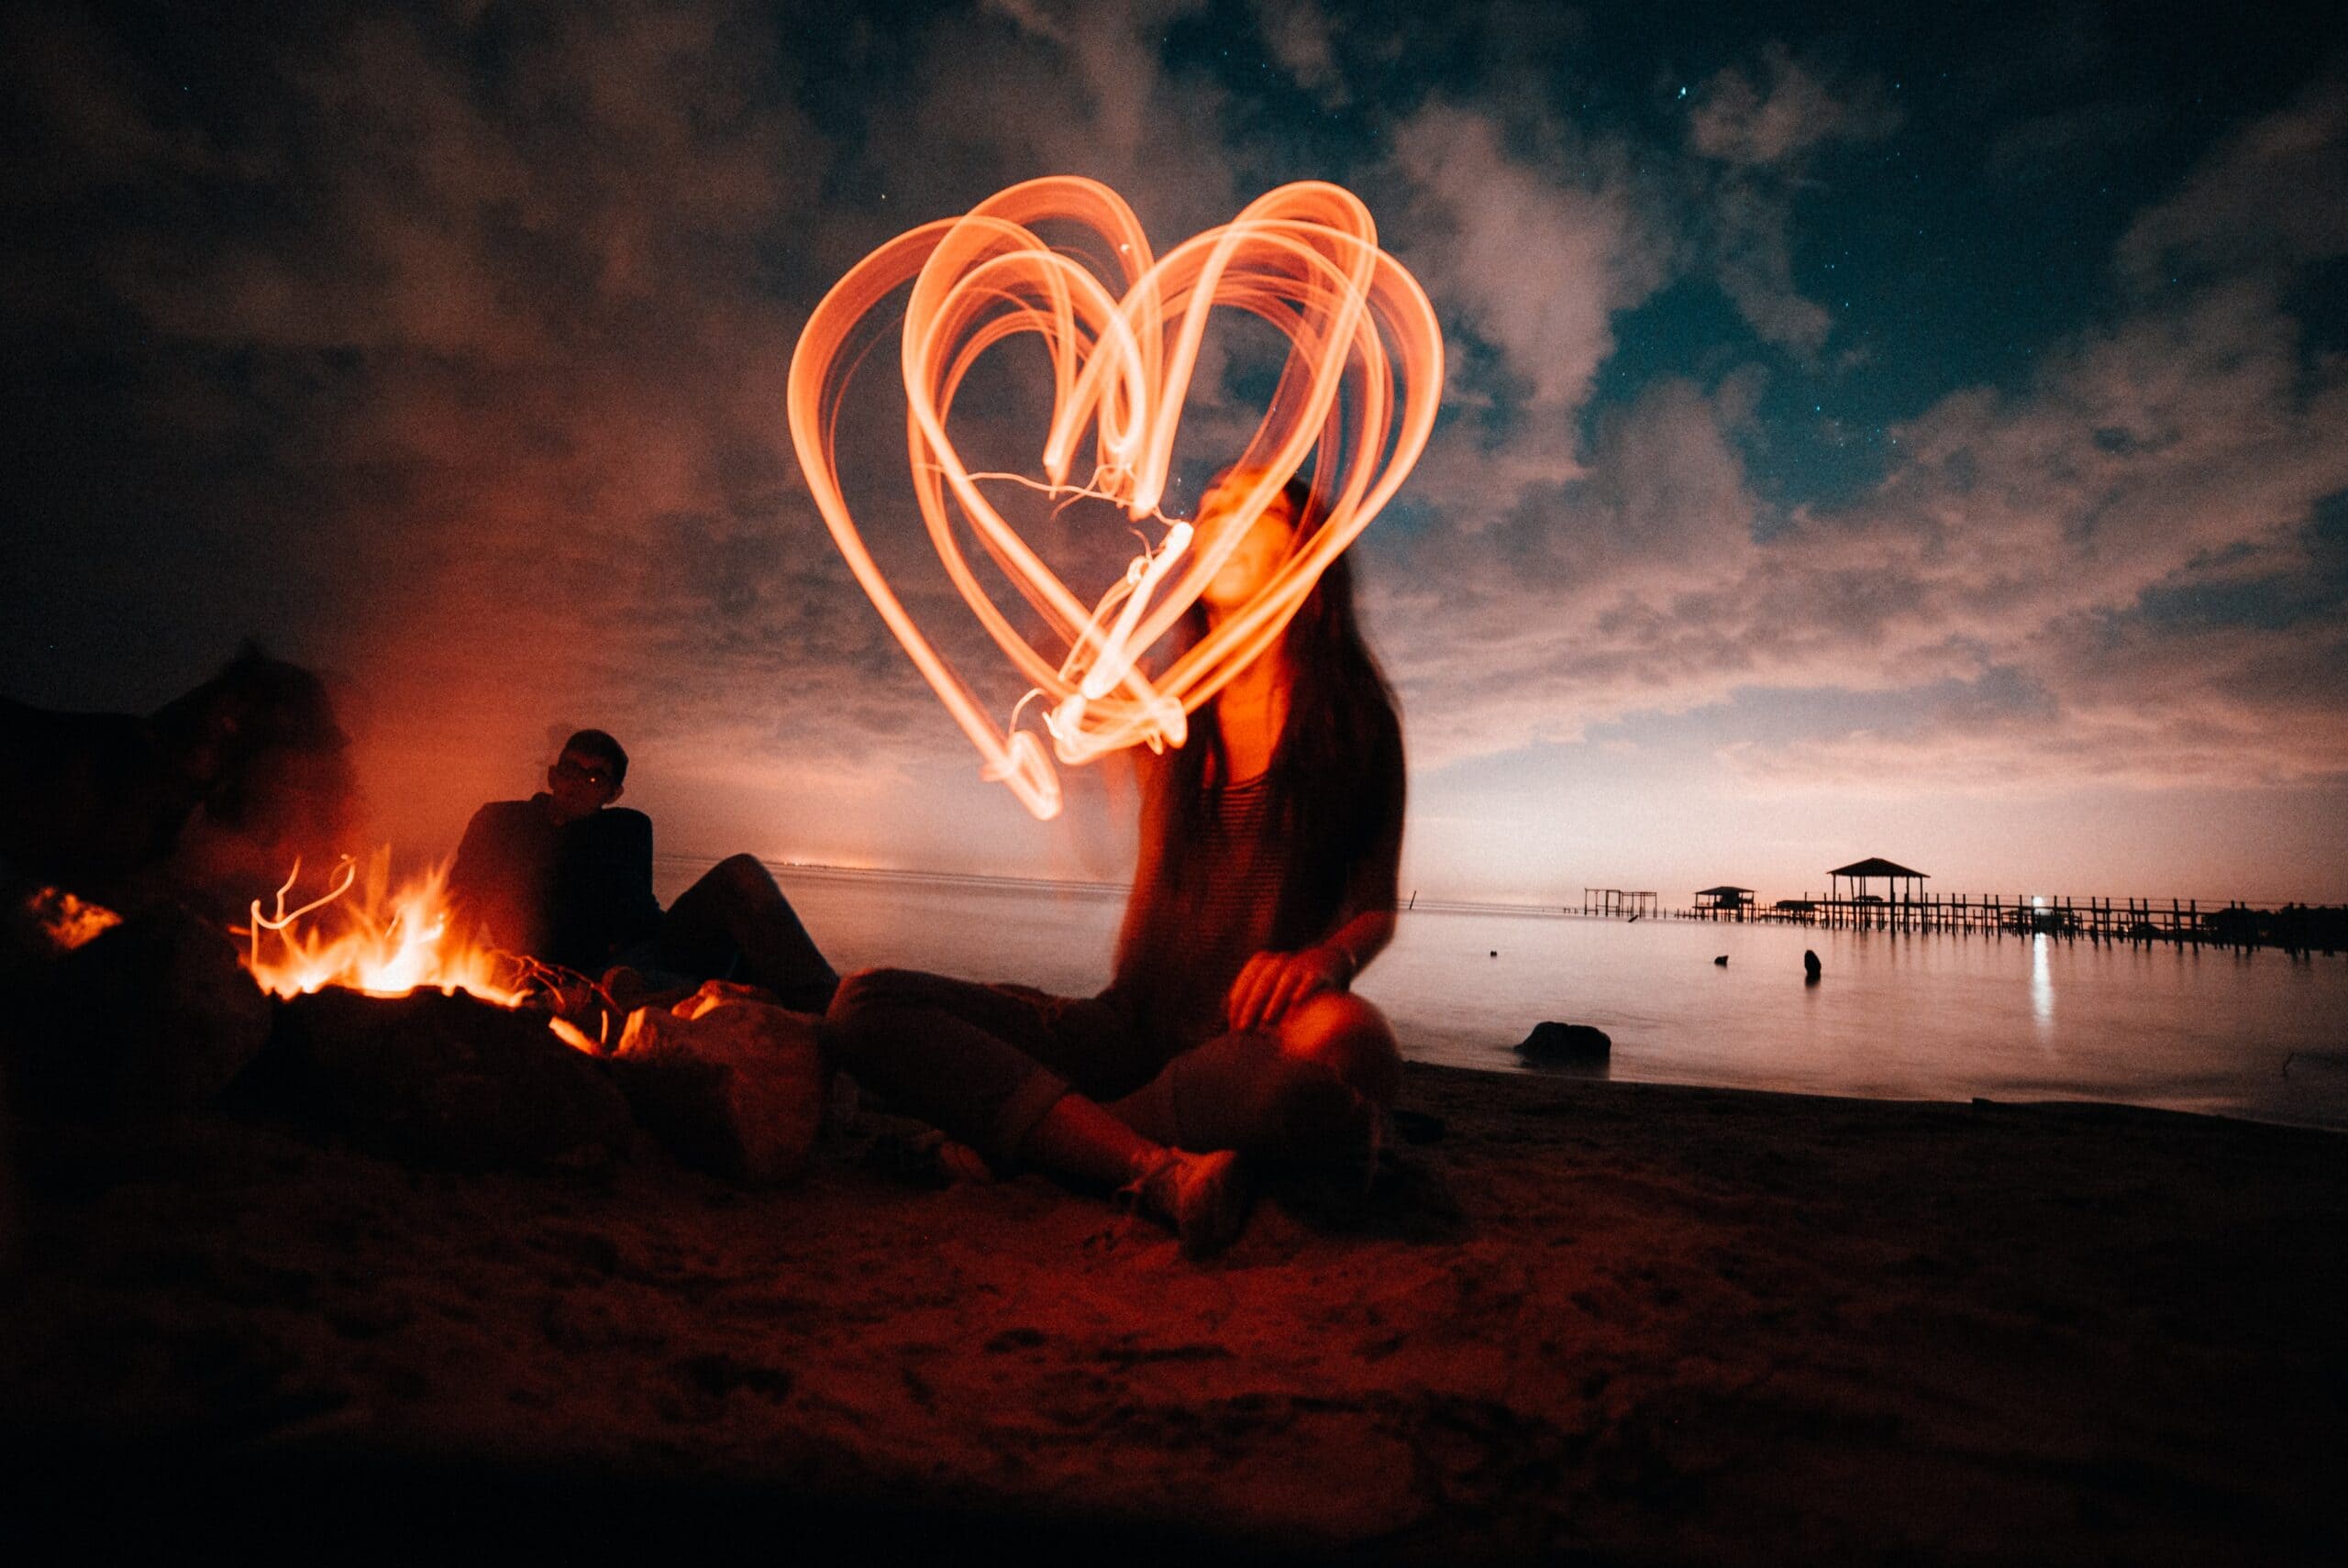 A long exposure red heart drawn n front of a figure next to a campfire at sunset.